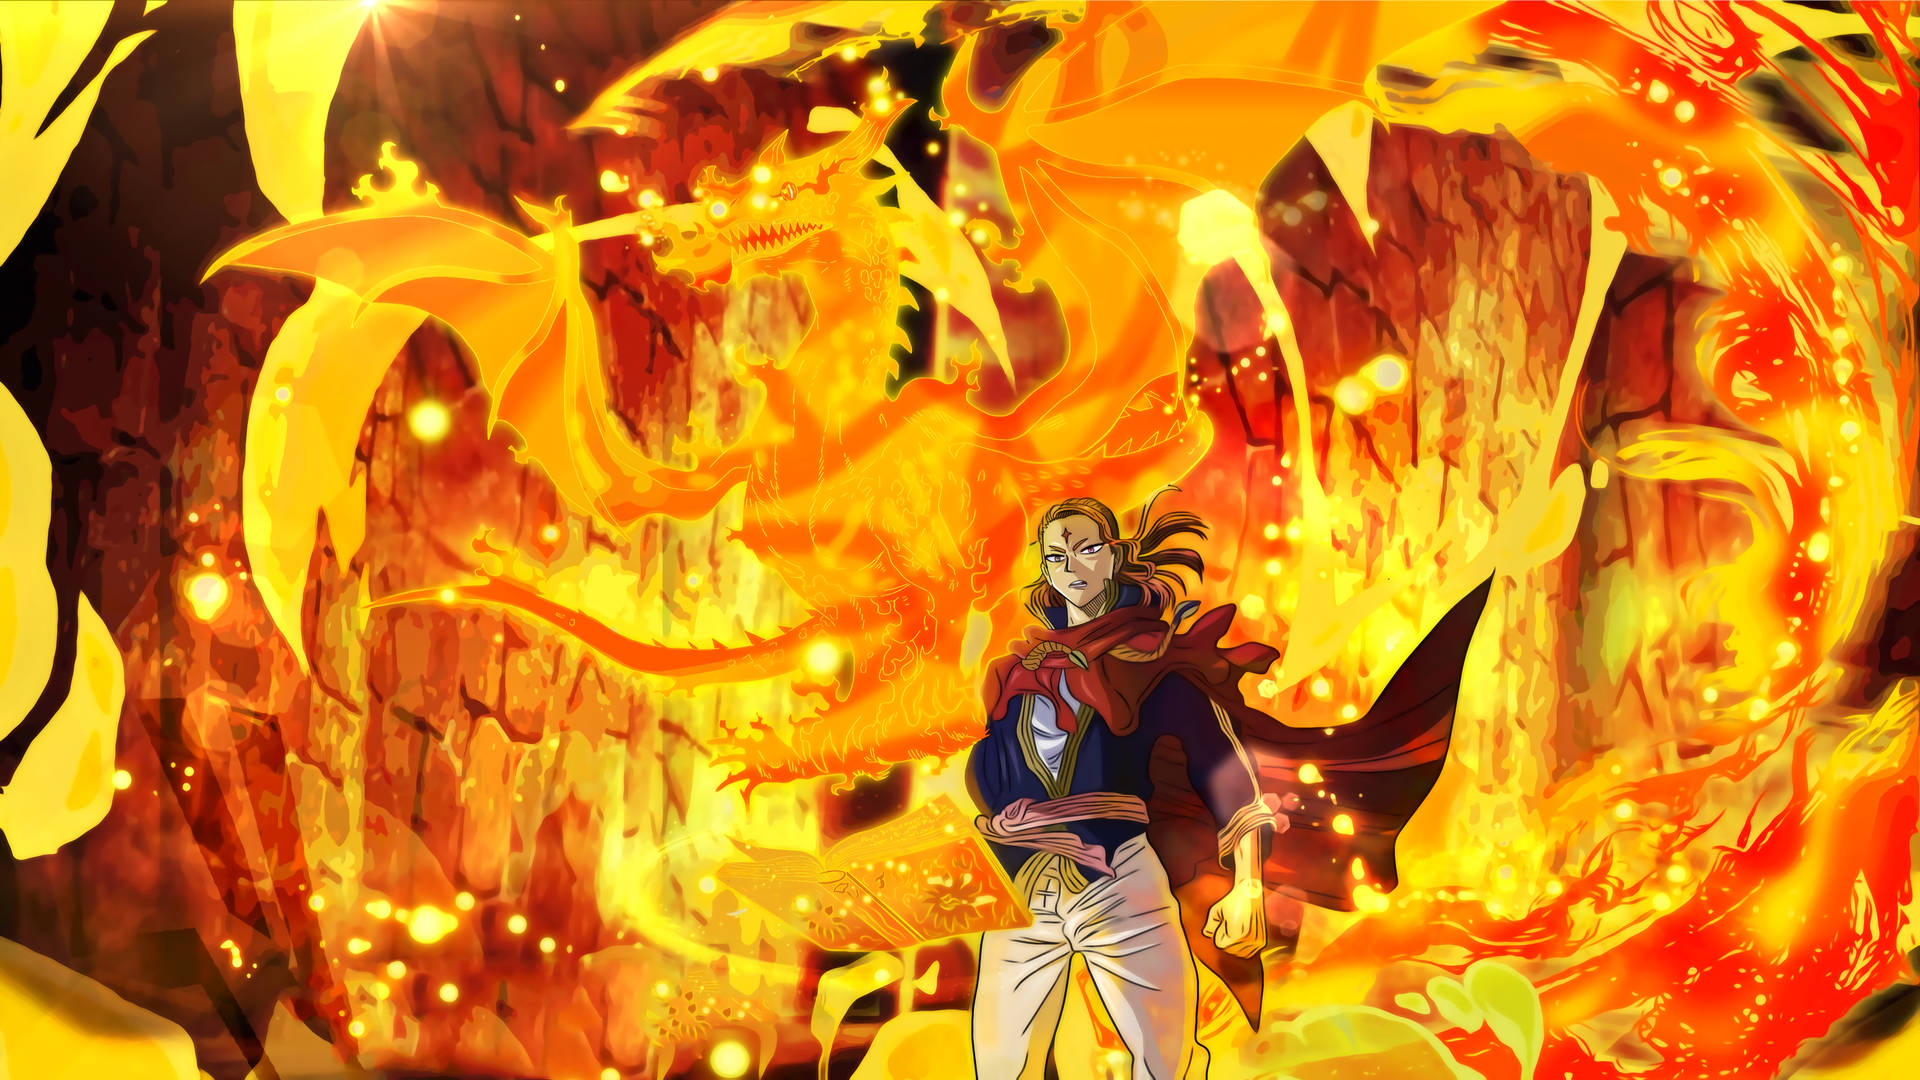 Anime Fire Wallpapers